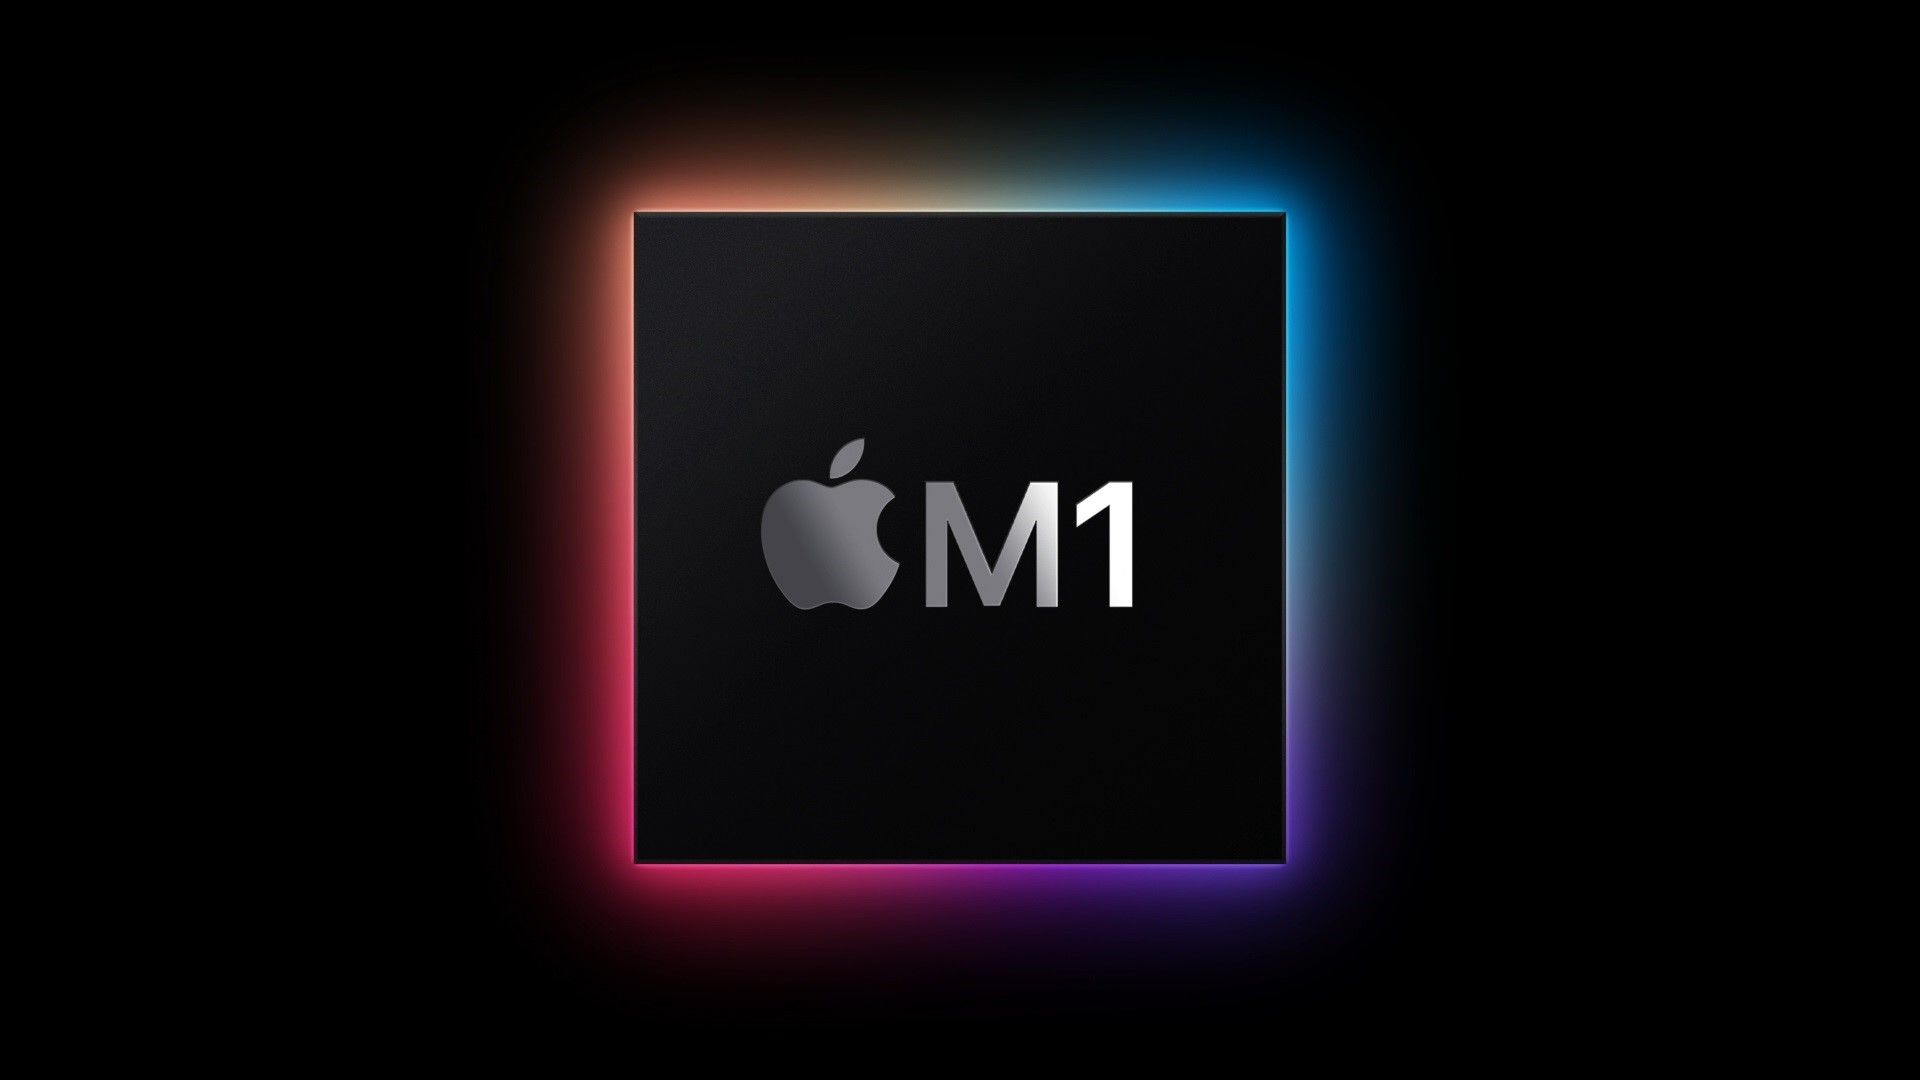 The Apple ARM-based M1 Chip